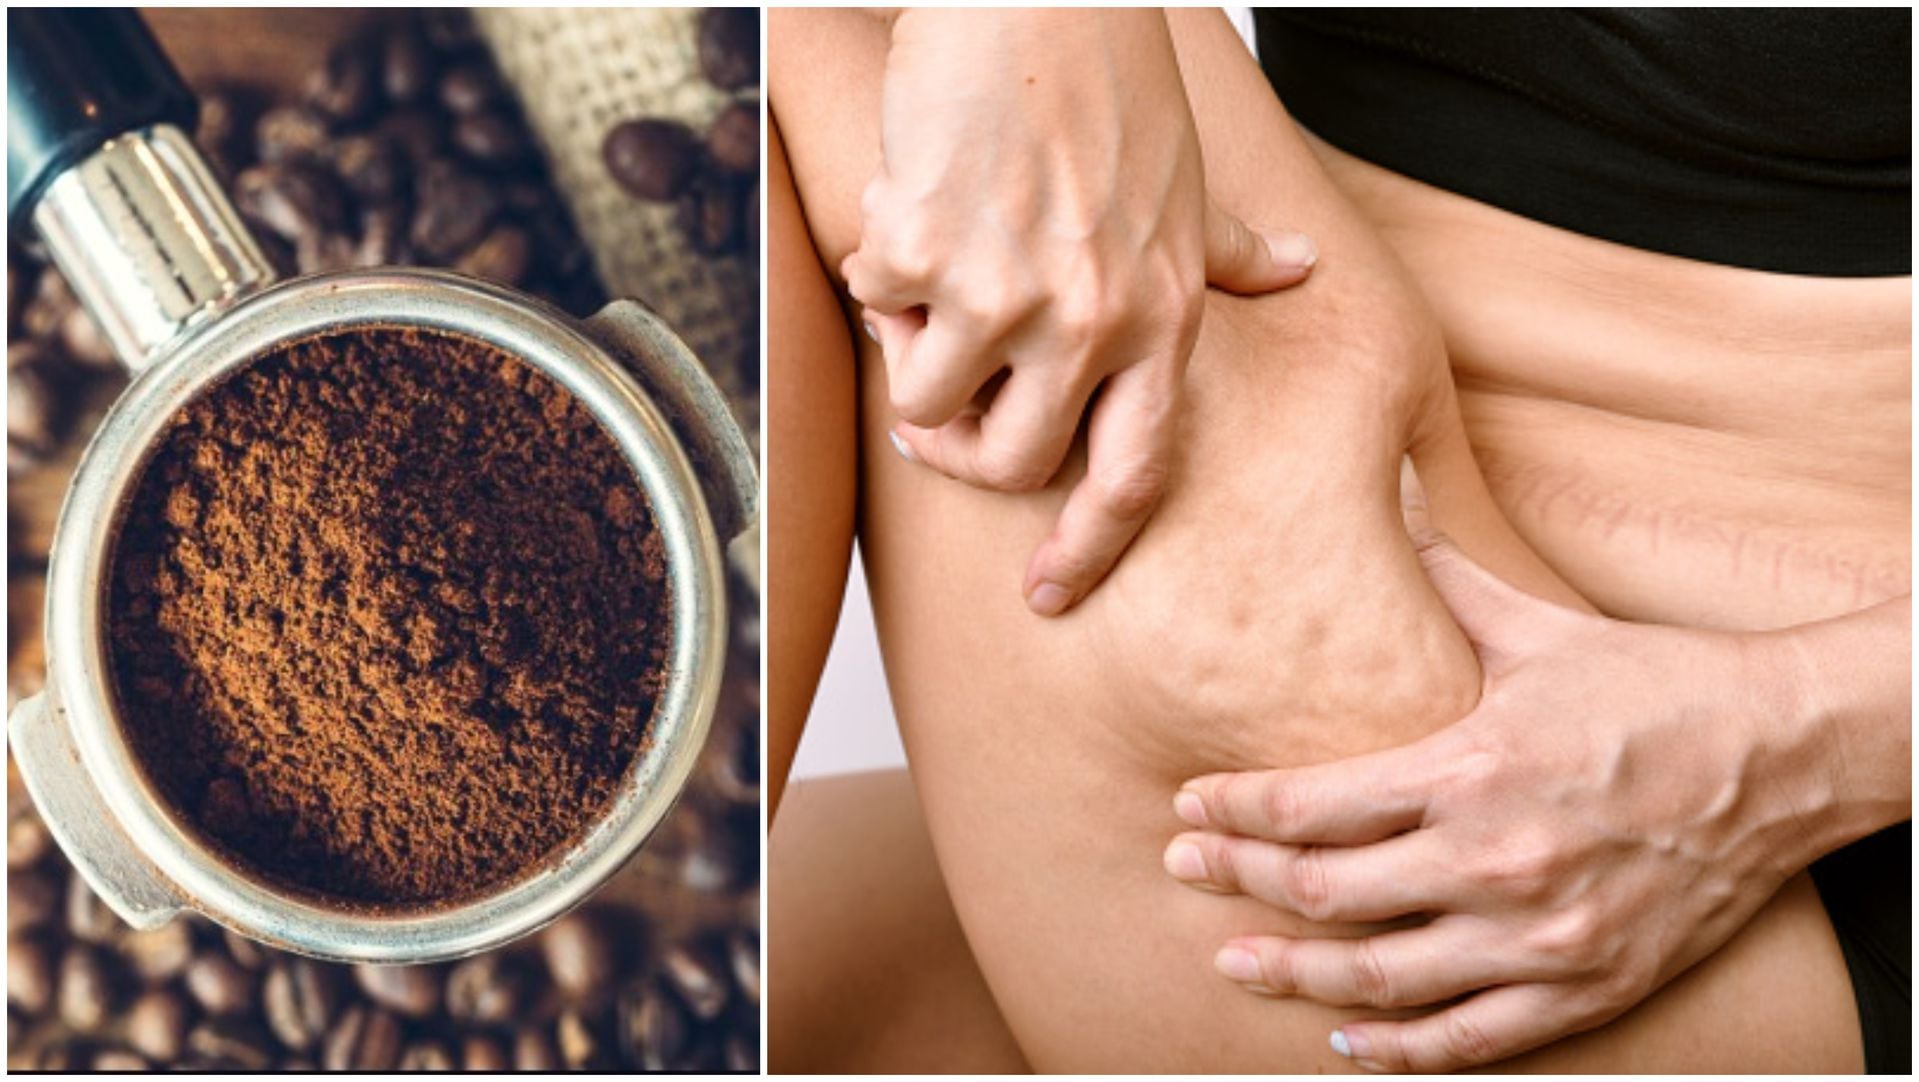 Coffee contains several properties that can significantly improve the health and vitality of the skin.